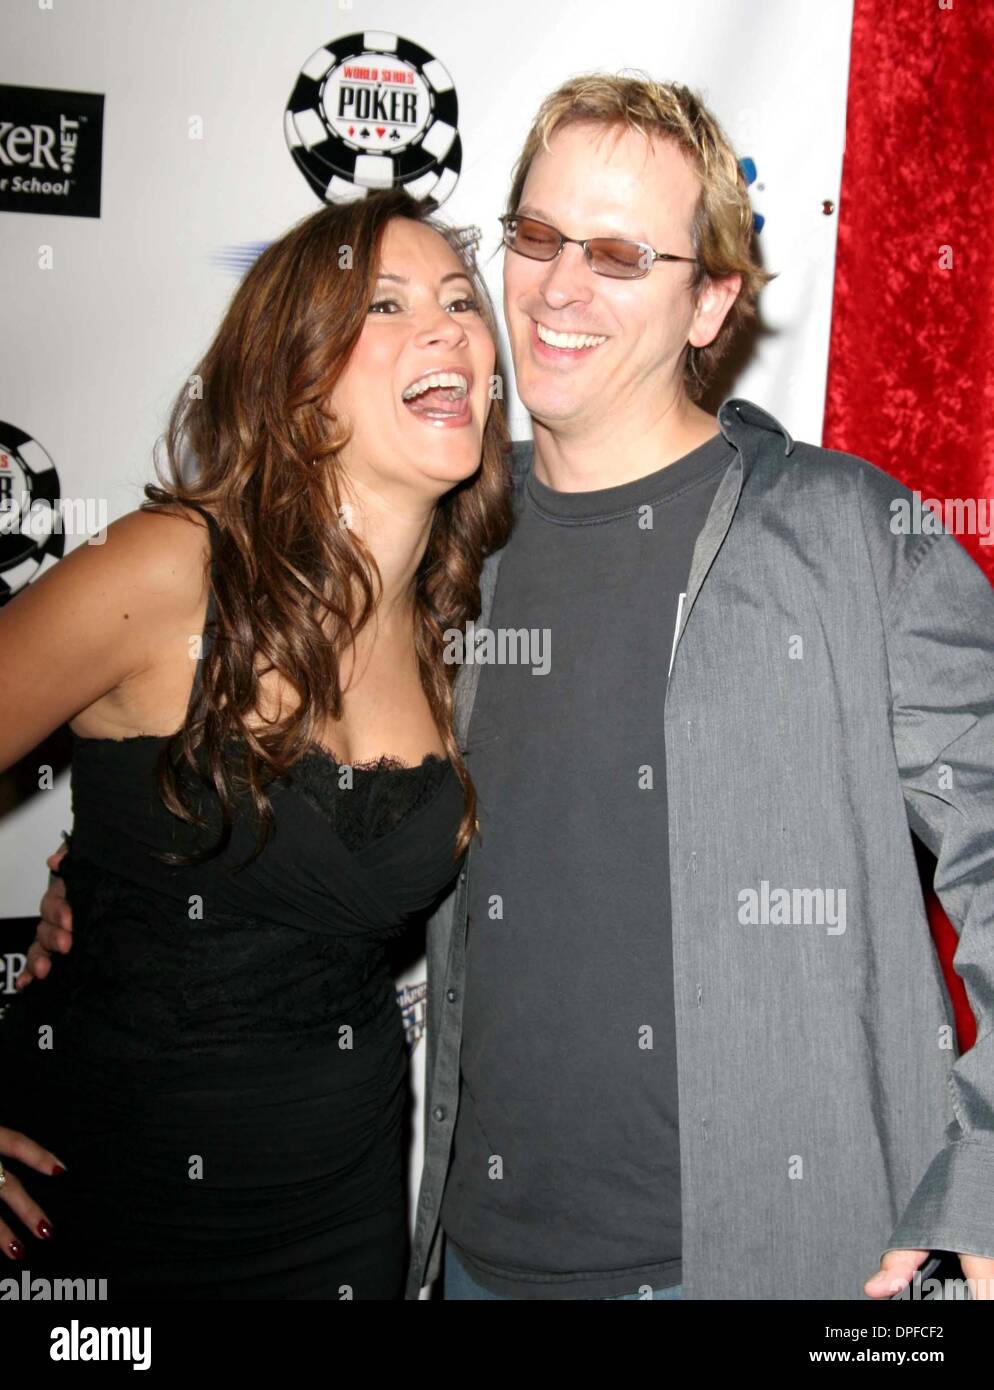 July 29, 2006 - Hollywood, California, U.S. - K49165EG.OFFICIAL WORLD  SERIES OF POKER PARTY AT THE VOODOO LOUNGE AT RIO ALL-SUITE HOTEL AND CASINO  LAS VEGAS , NV 07-28-2006. - JENNIFER TILLY(Credit